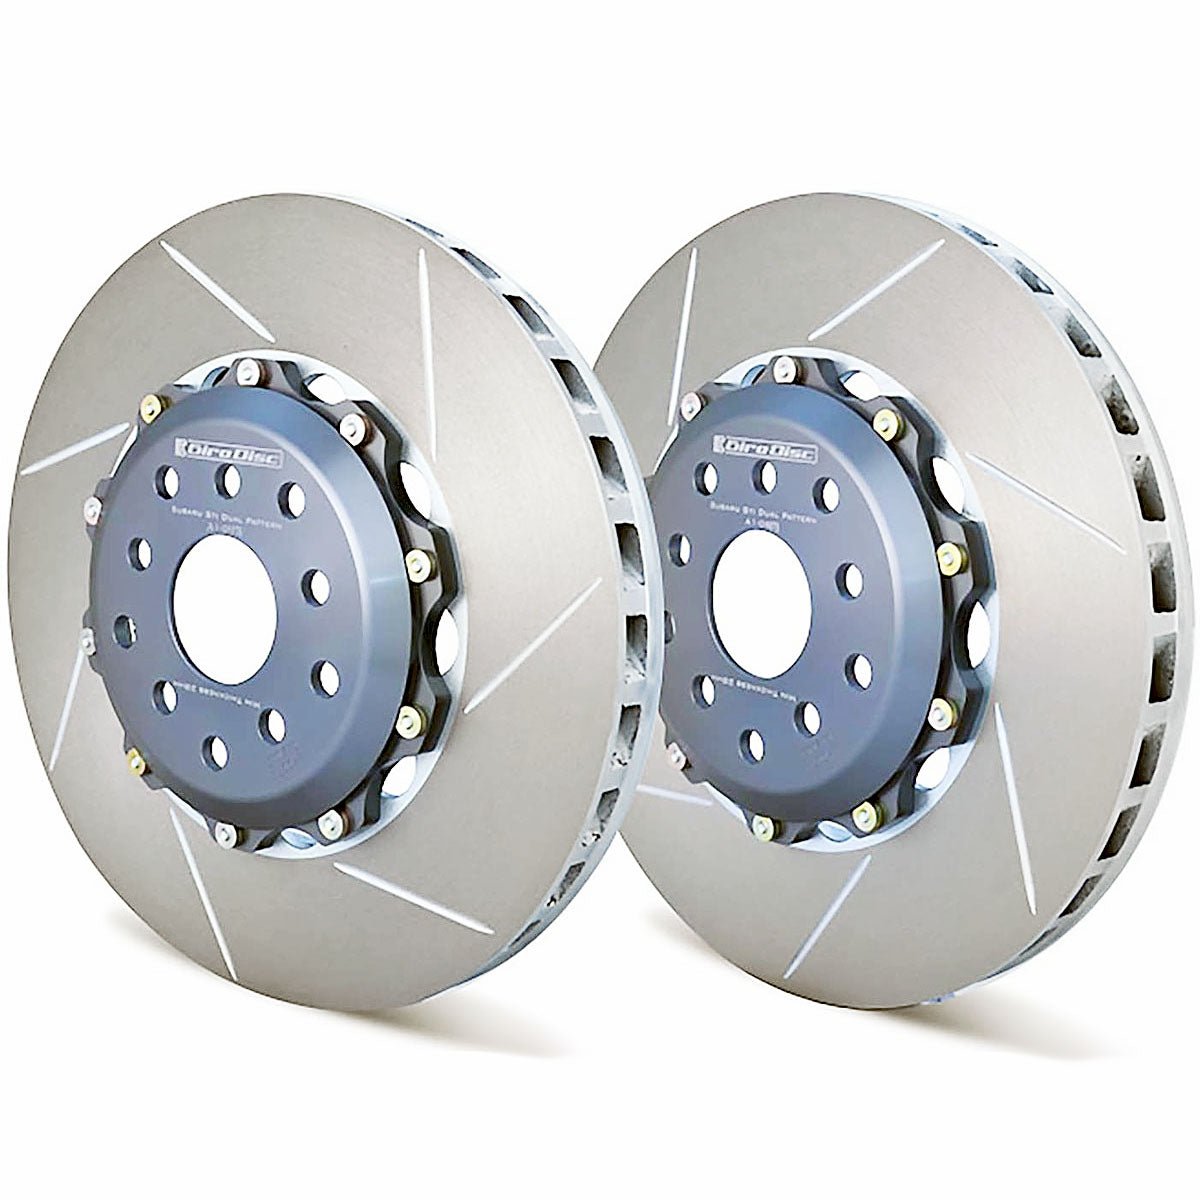 A1-043 Girodisc 2pc Front Brake Rotors - Competition Motorsport